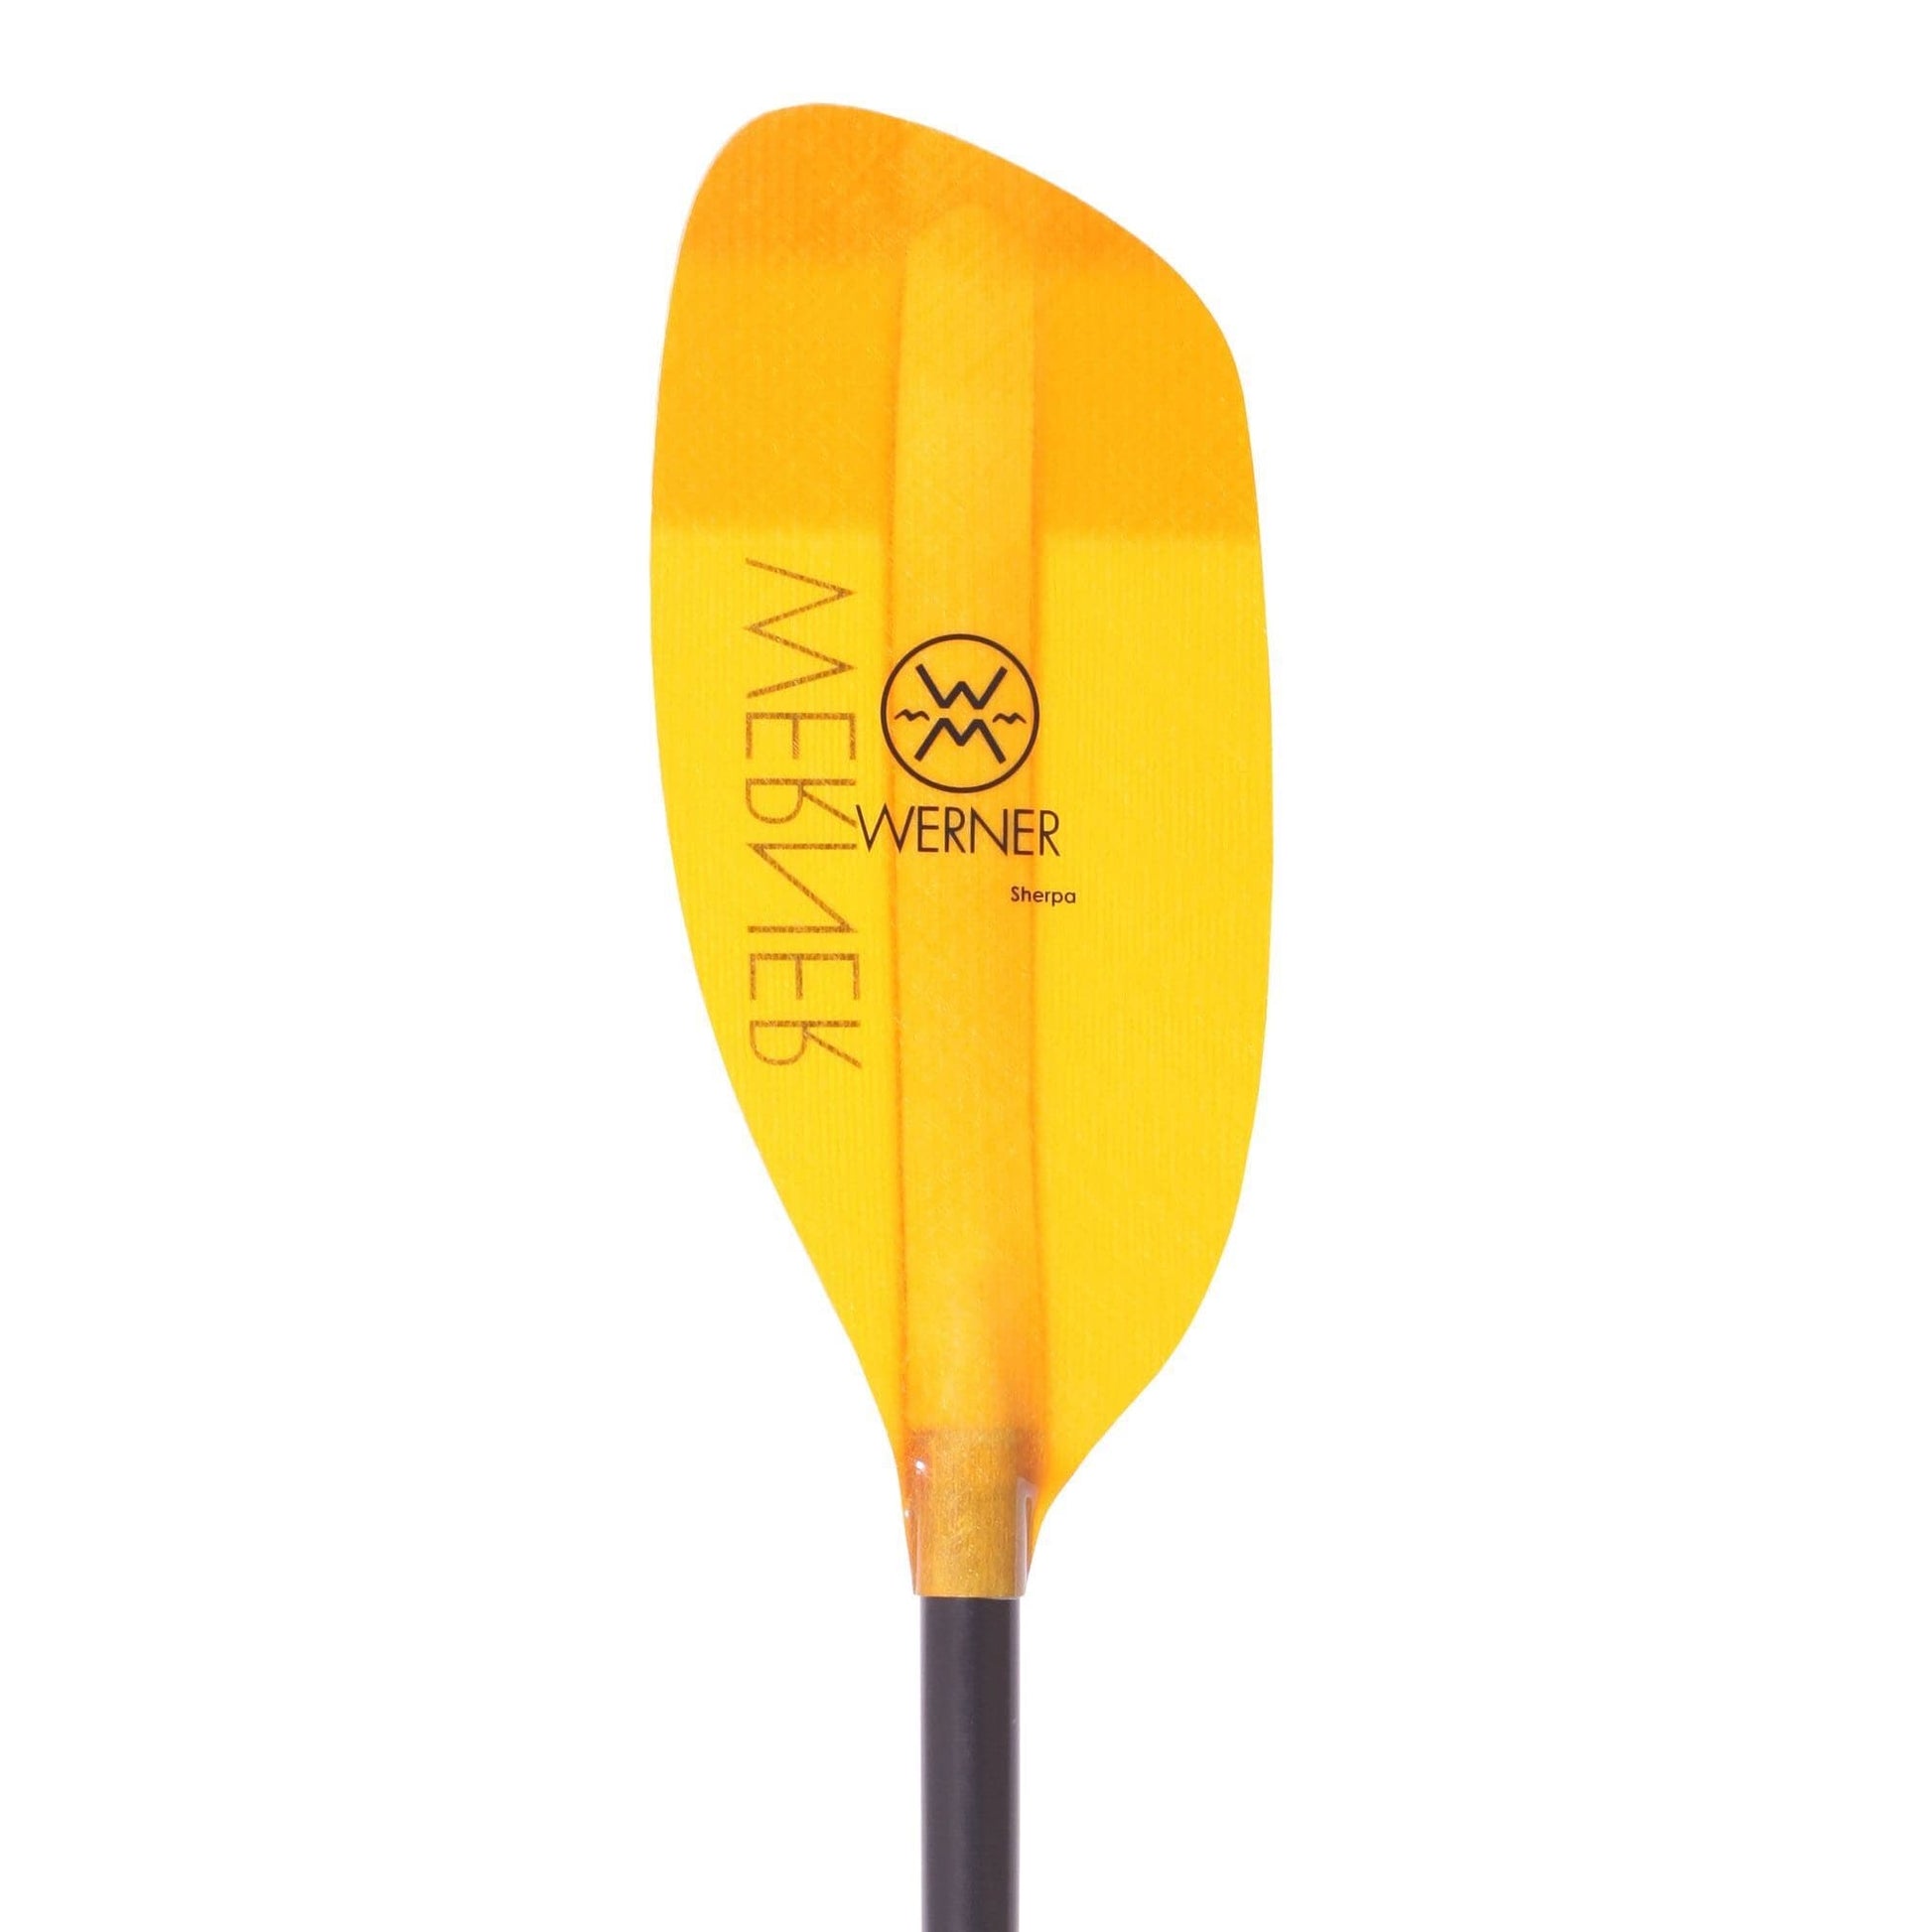 Featuring the Sherpa 2-Piece Kayak Paddle breakdown paddle, fiberglass whitewater paddle, hand paddle, ik paddle, pack raft paddle manufactured by Werner shown here from a third angle.